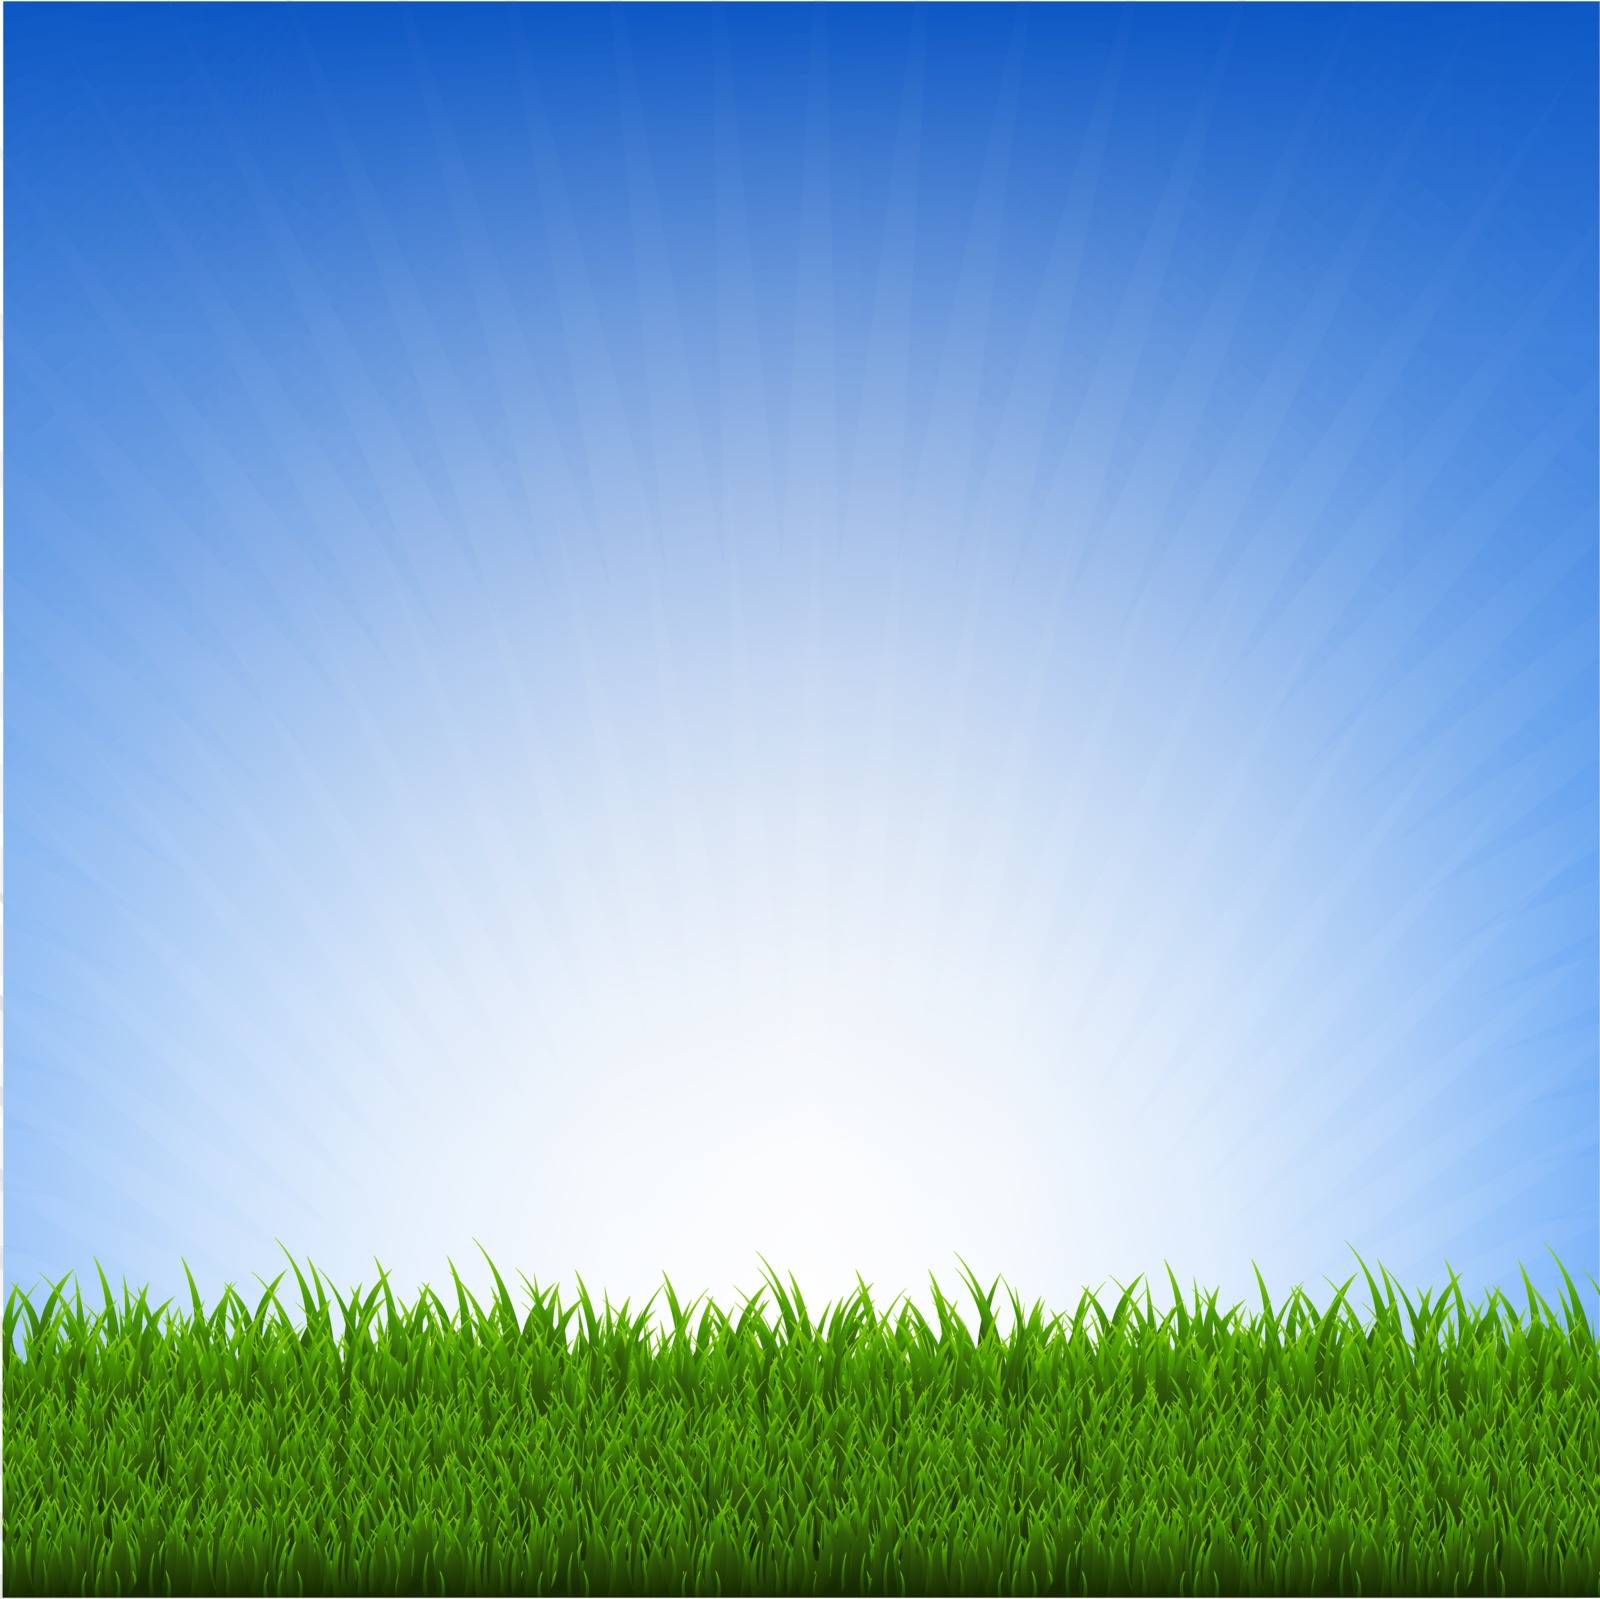 Grass And Sky, With Gradient Mesh, Vector Illustration